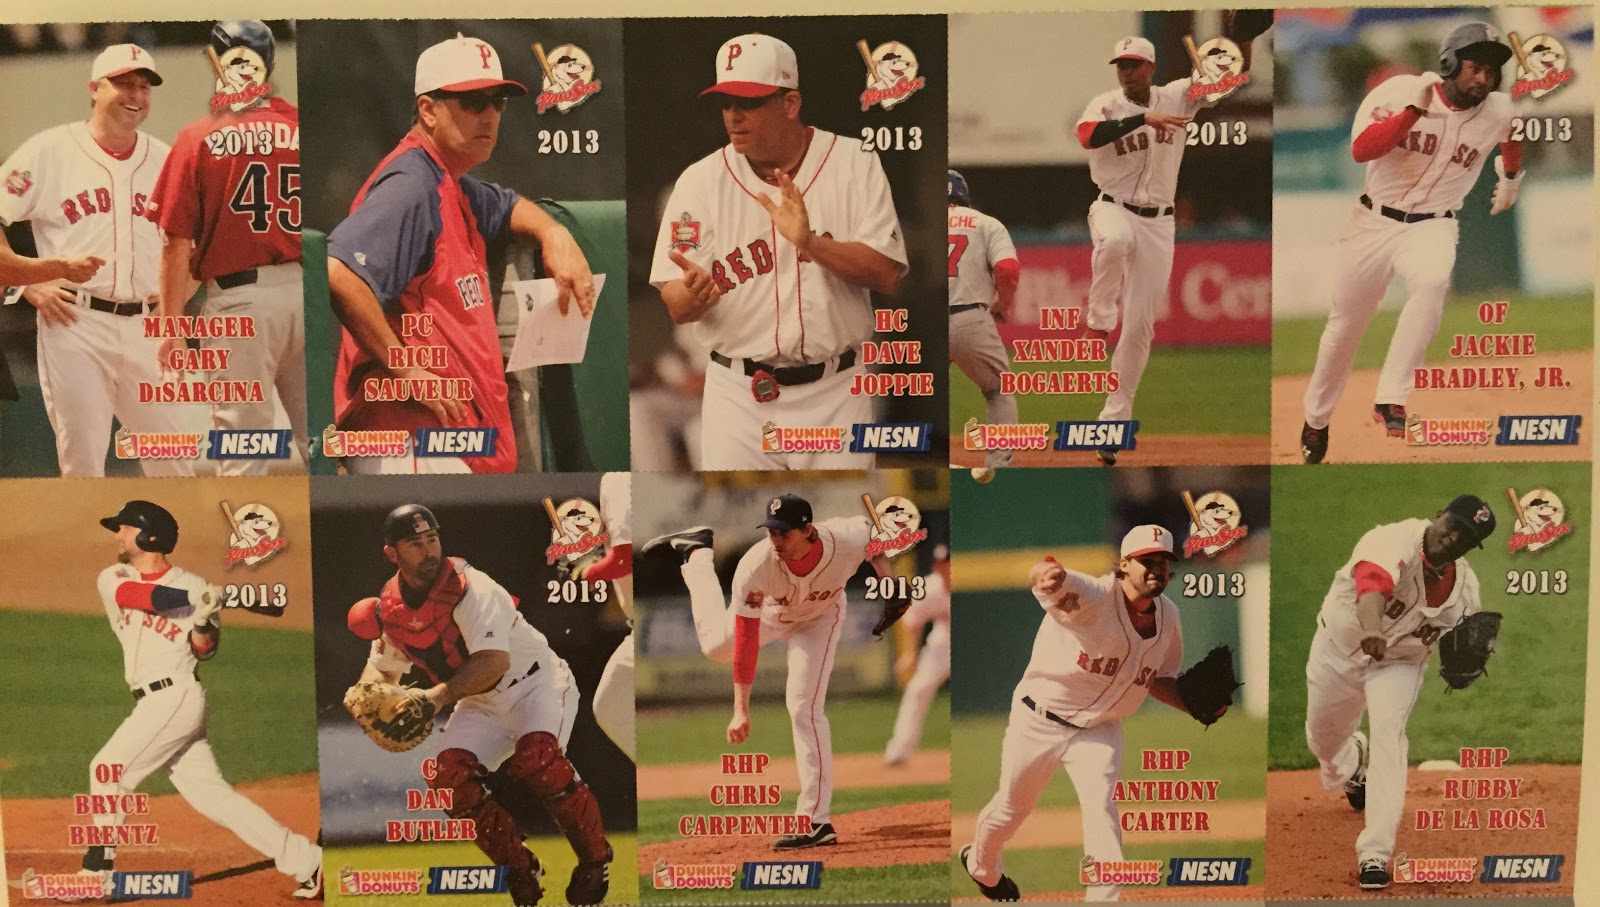 2013 pawtucket red sox promotional team card set | cards of future